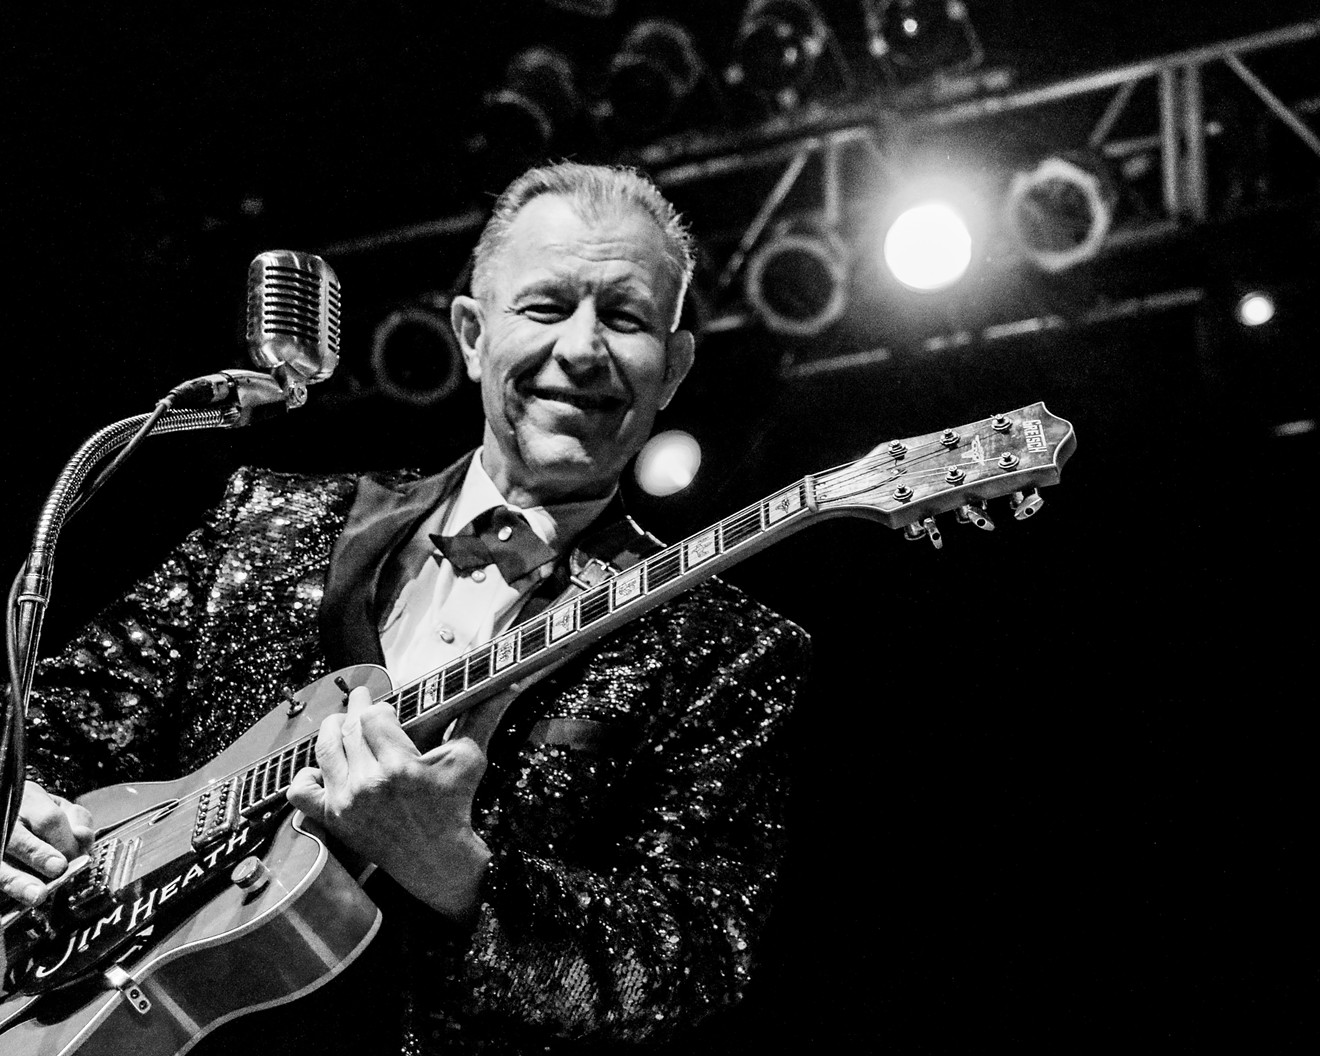 Reverend Horton Heat is playing a livestream show this week, and we can sure use his blessing.